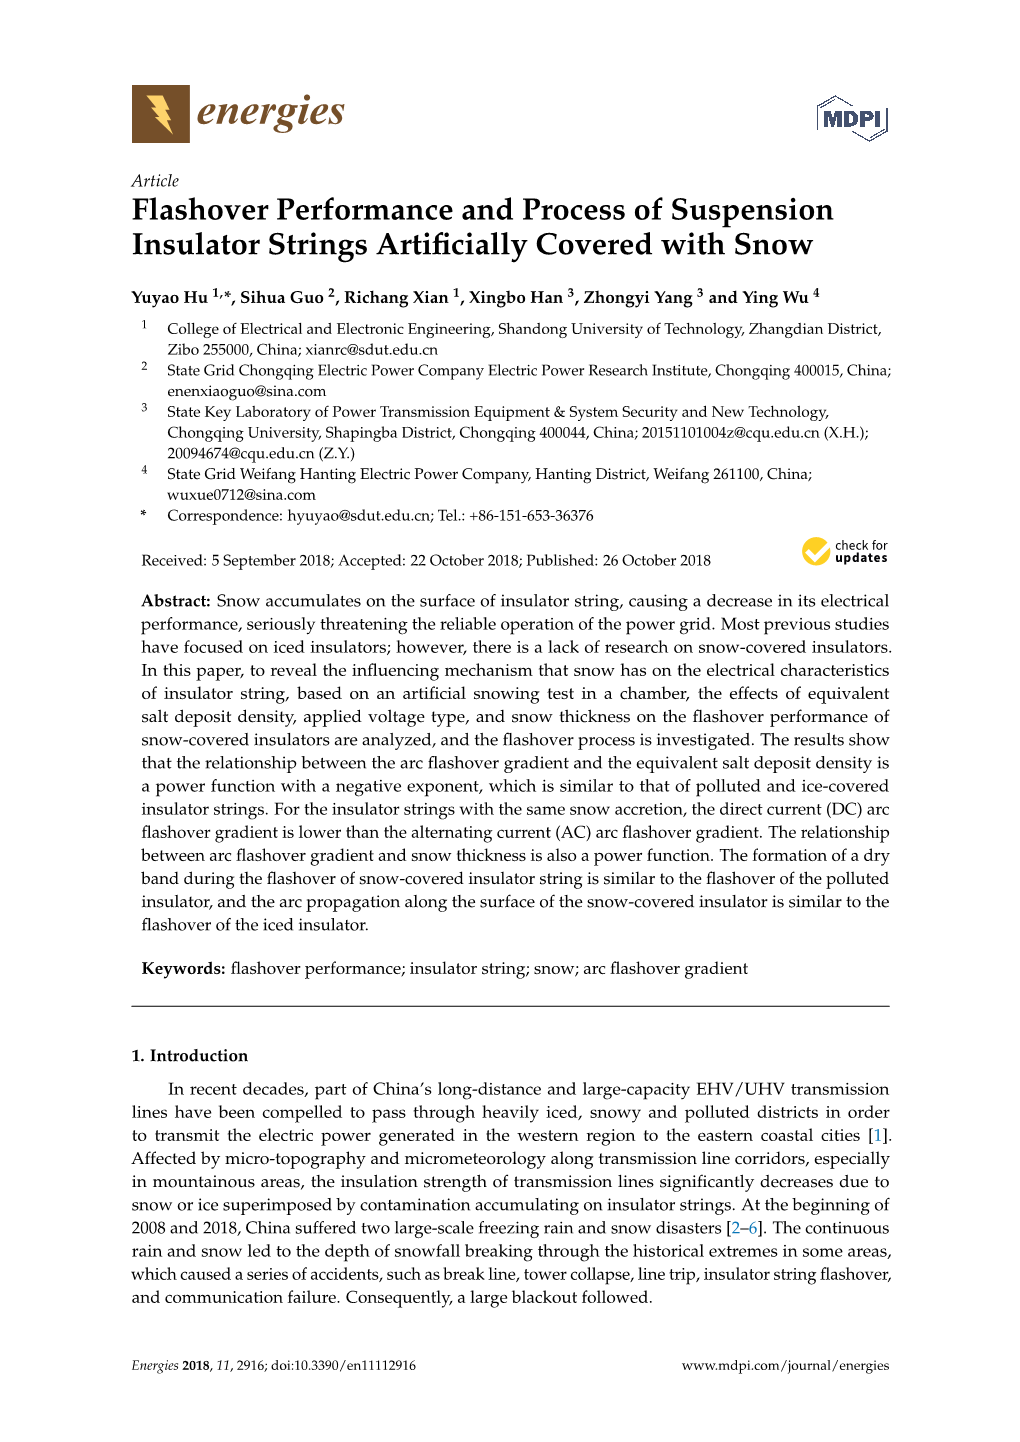 Flashover Performance and Process of Suspension Insulator Strings Artiﬁcially Covered with Snow